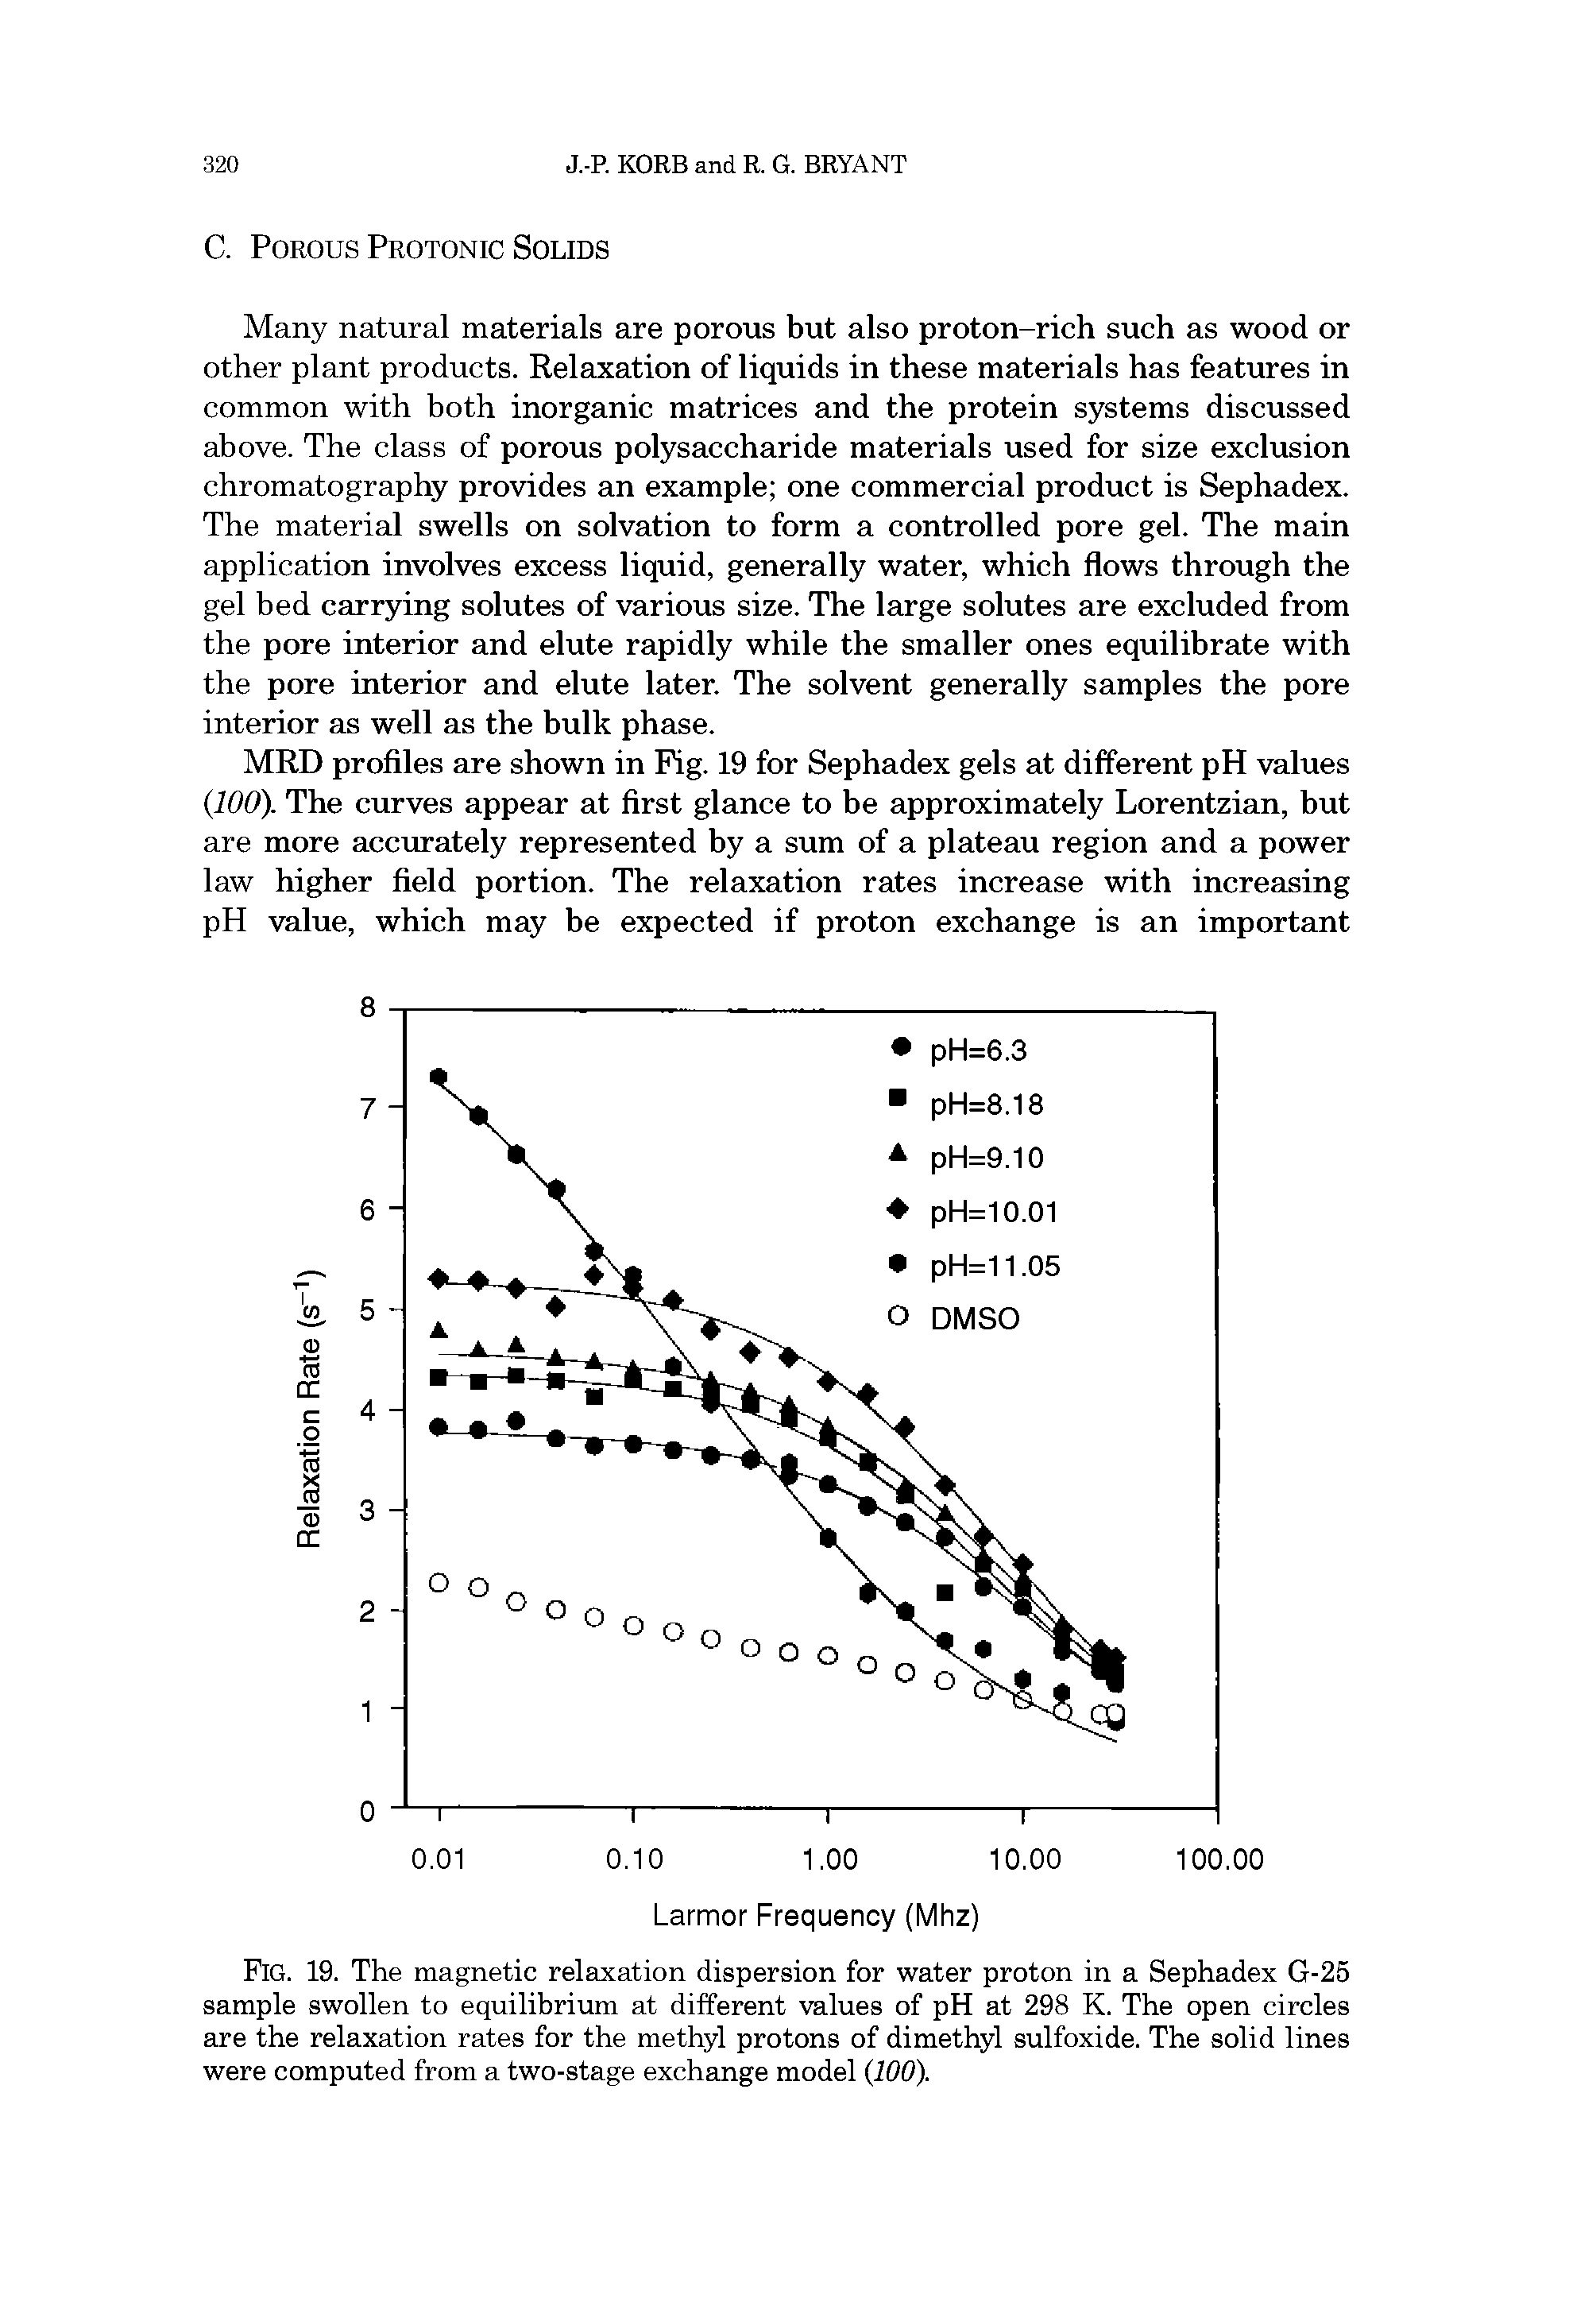 Fig. 19. The magnetic relaxation dispersion for water proton in a Sephadex G-25 sample swollen to equilibrium at different values of pH at 298 K. The open circles are the relaxation rates for the methyl protons of dimethyl sulfoxide. The solid lines were computed from a two-stage exchange model 100).